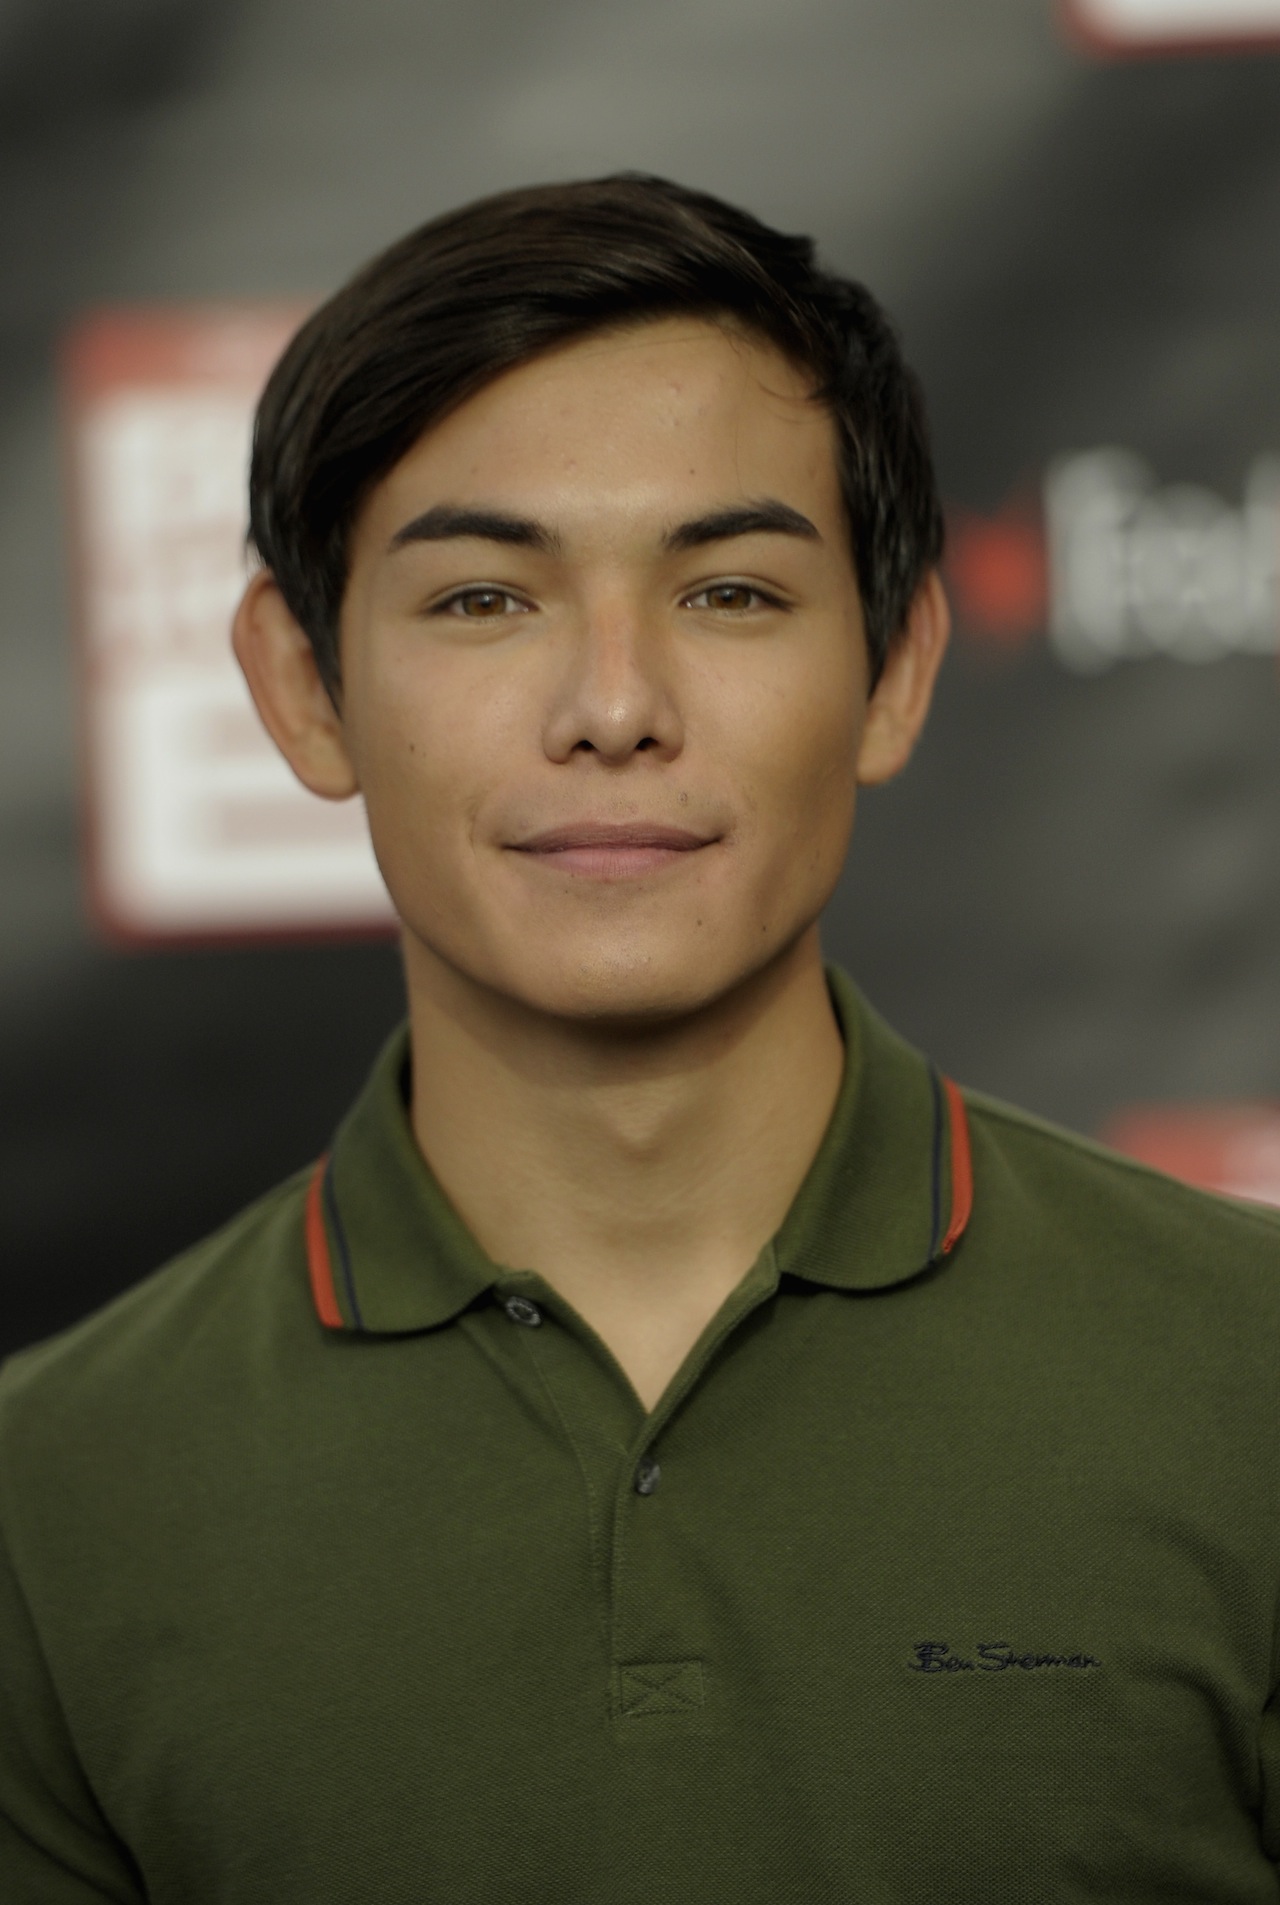 NEW YORK, NY - OCTOBER 09:  Actor Ryan Potter attends Walt Disney Studios' 2014 New York Comic Con presentations of "Big Hero 6" and "Tomorrowland" at the Javits Convention Center on Thursday October 9, 2014 in New York City.  (Photo by Stephen Lovekin/Getty Images for Disney) *** Local Caption *** Ryan Potter